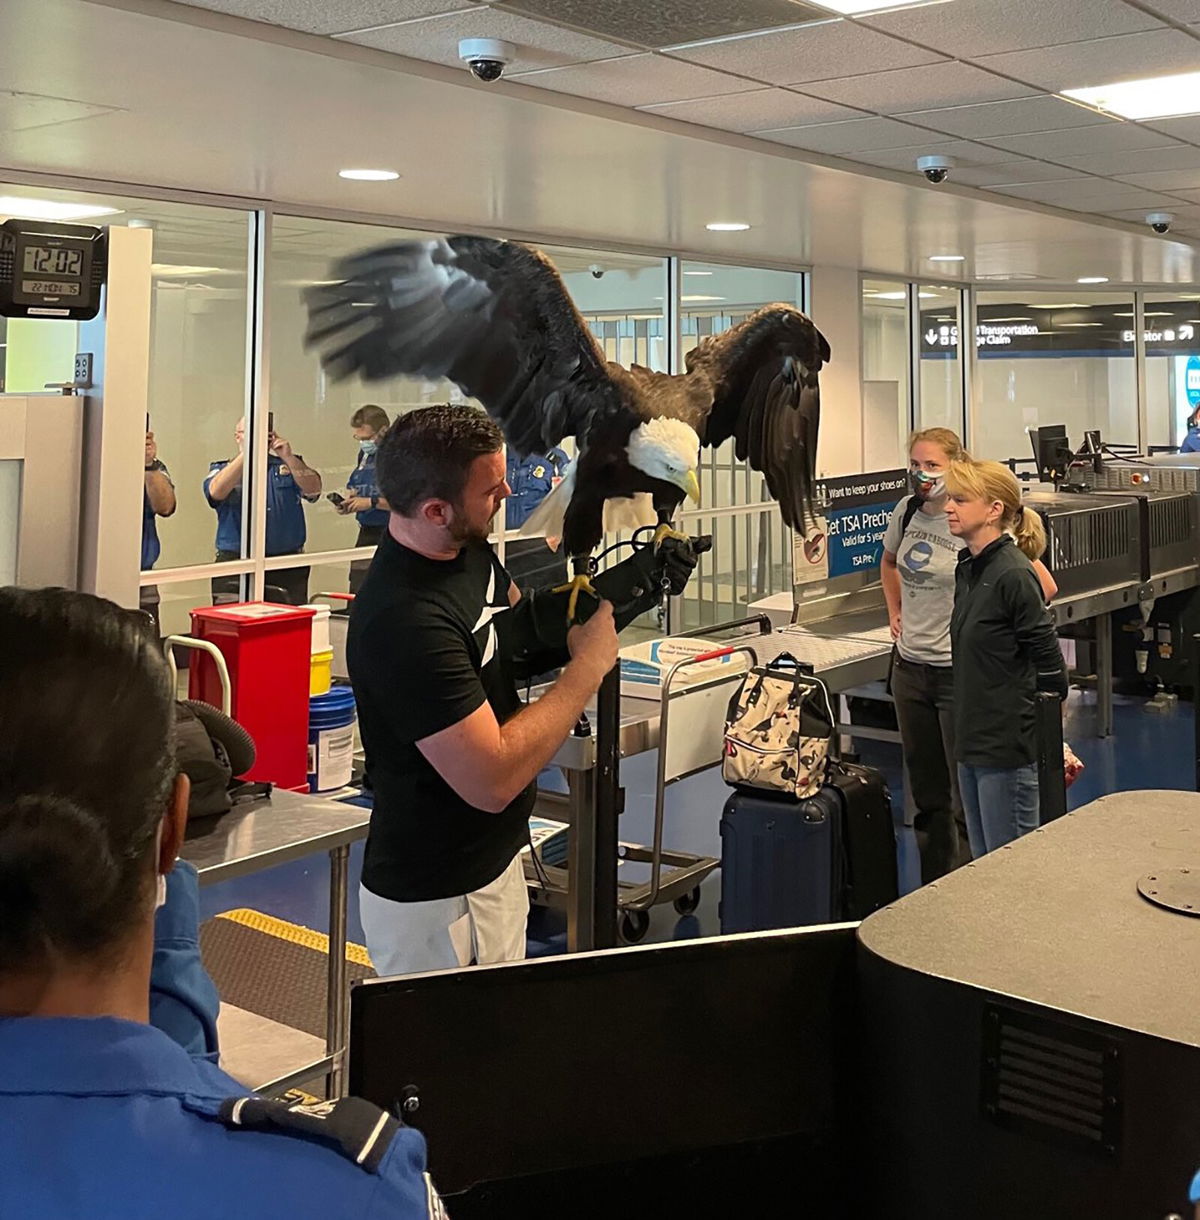 <i>TSA Southeast</i><br/>Passengers at the Charlotte Douglas International Airport in North Carolina had an unexpected interruption at the Transportation Security Administration checkpoint when a bald eagle